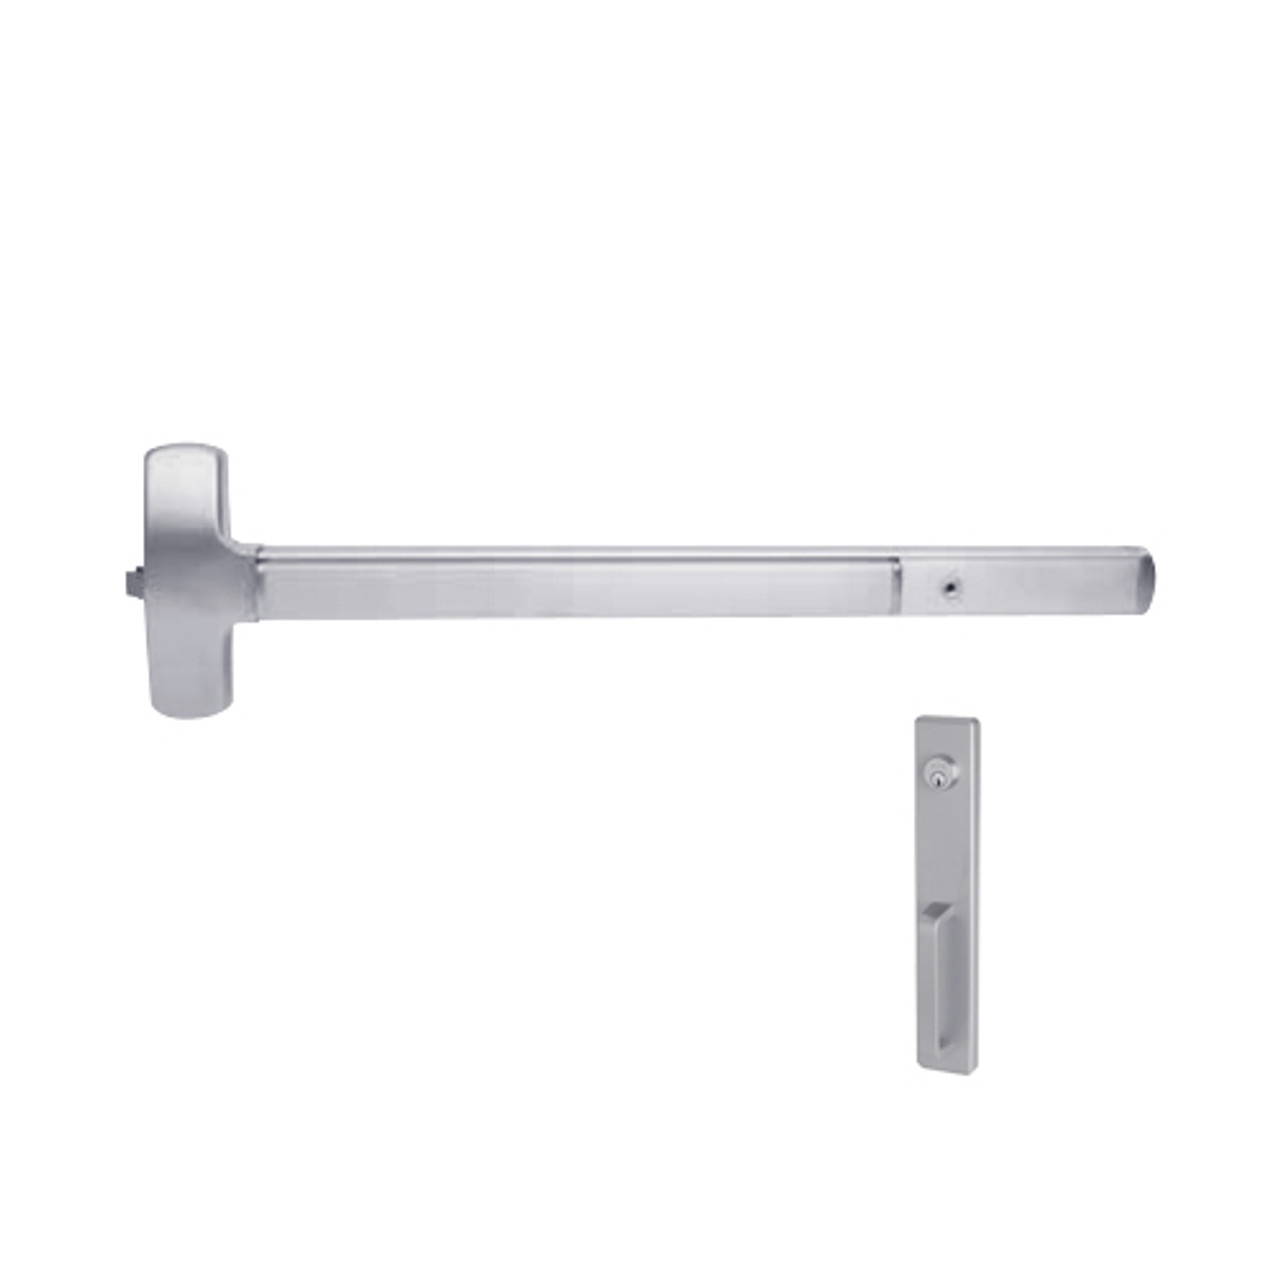 25-R-NL-US32-3 Falcon Exit Device in Polished Stainless Steel